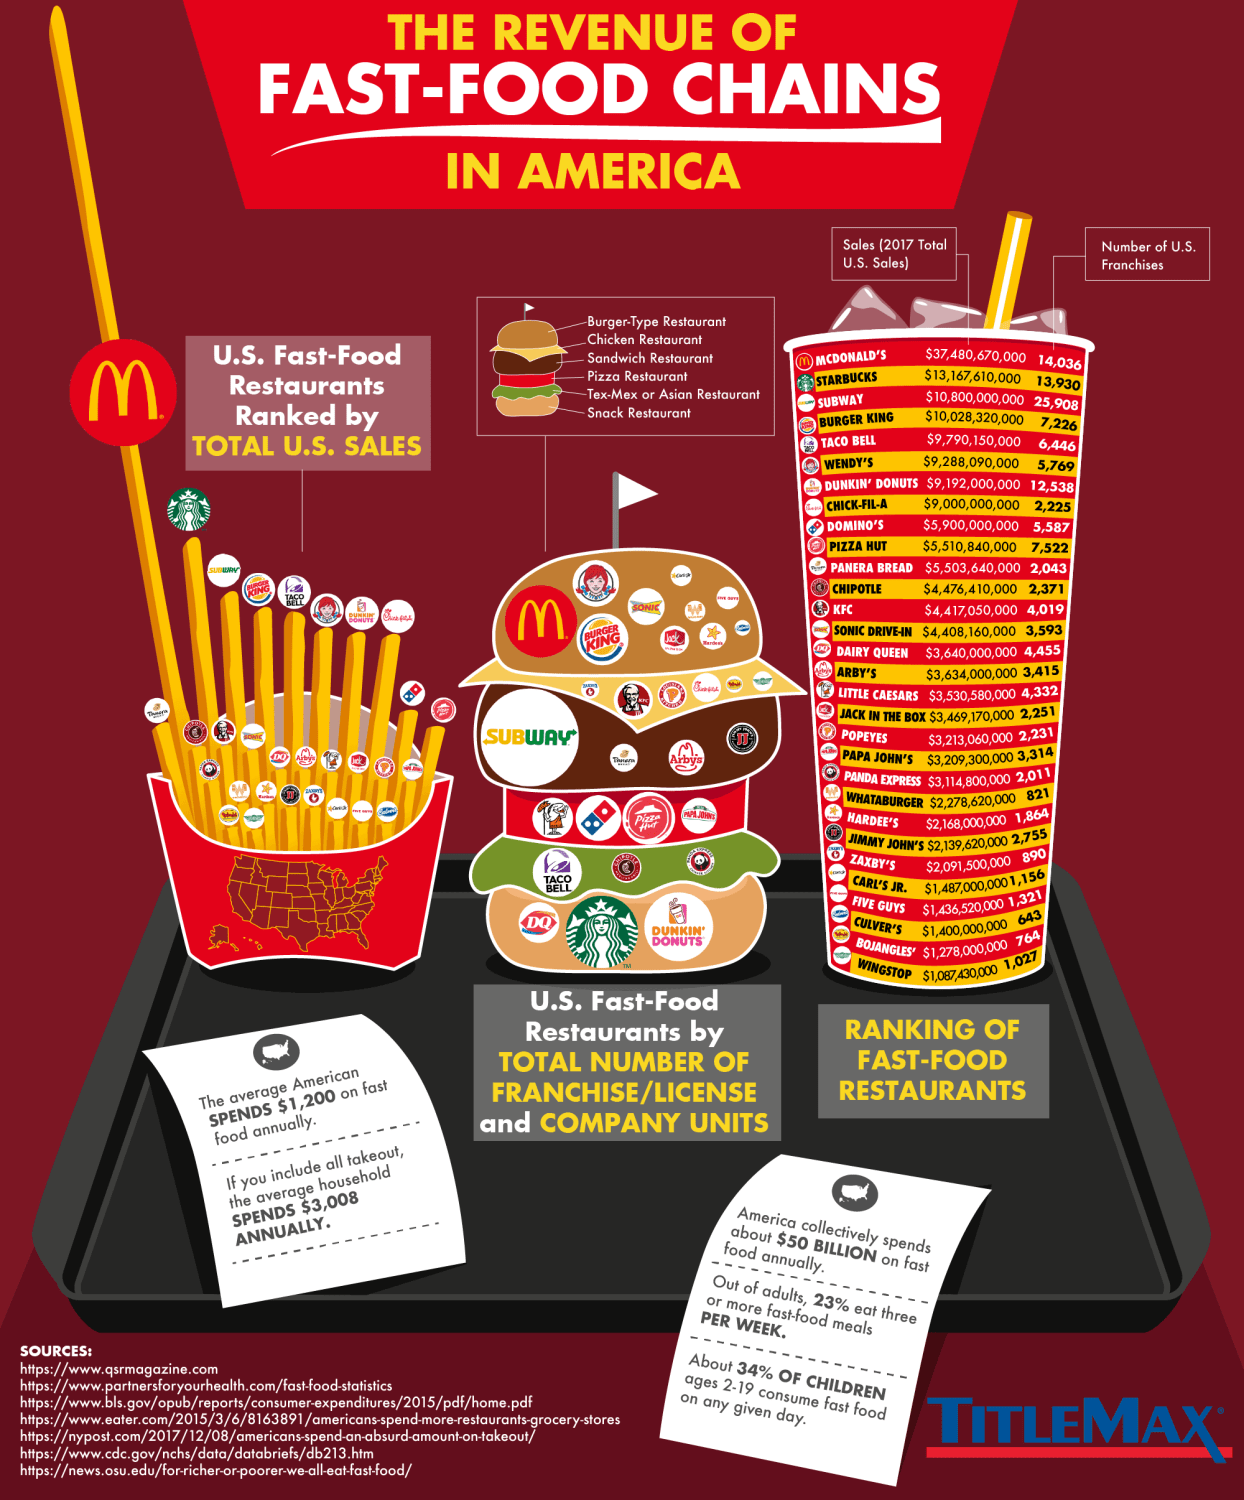 The revenue of fast-food chains in America